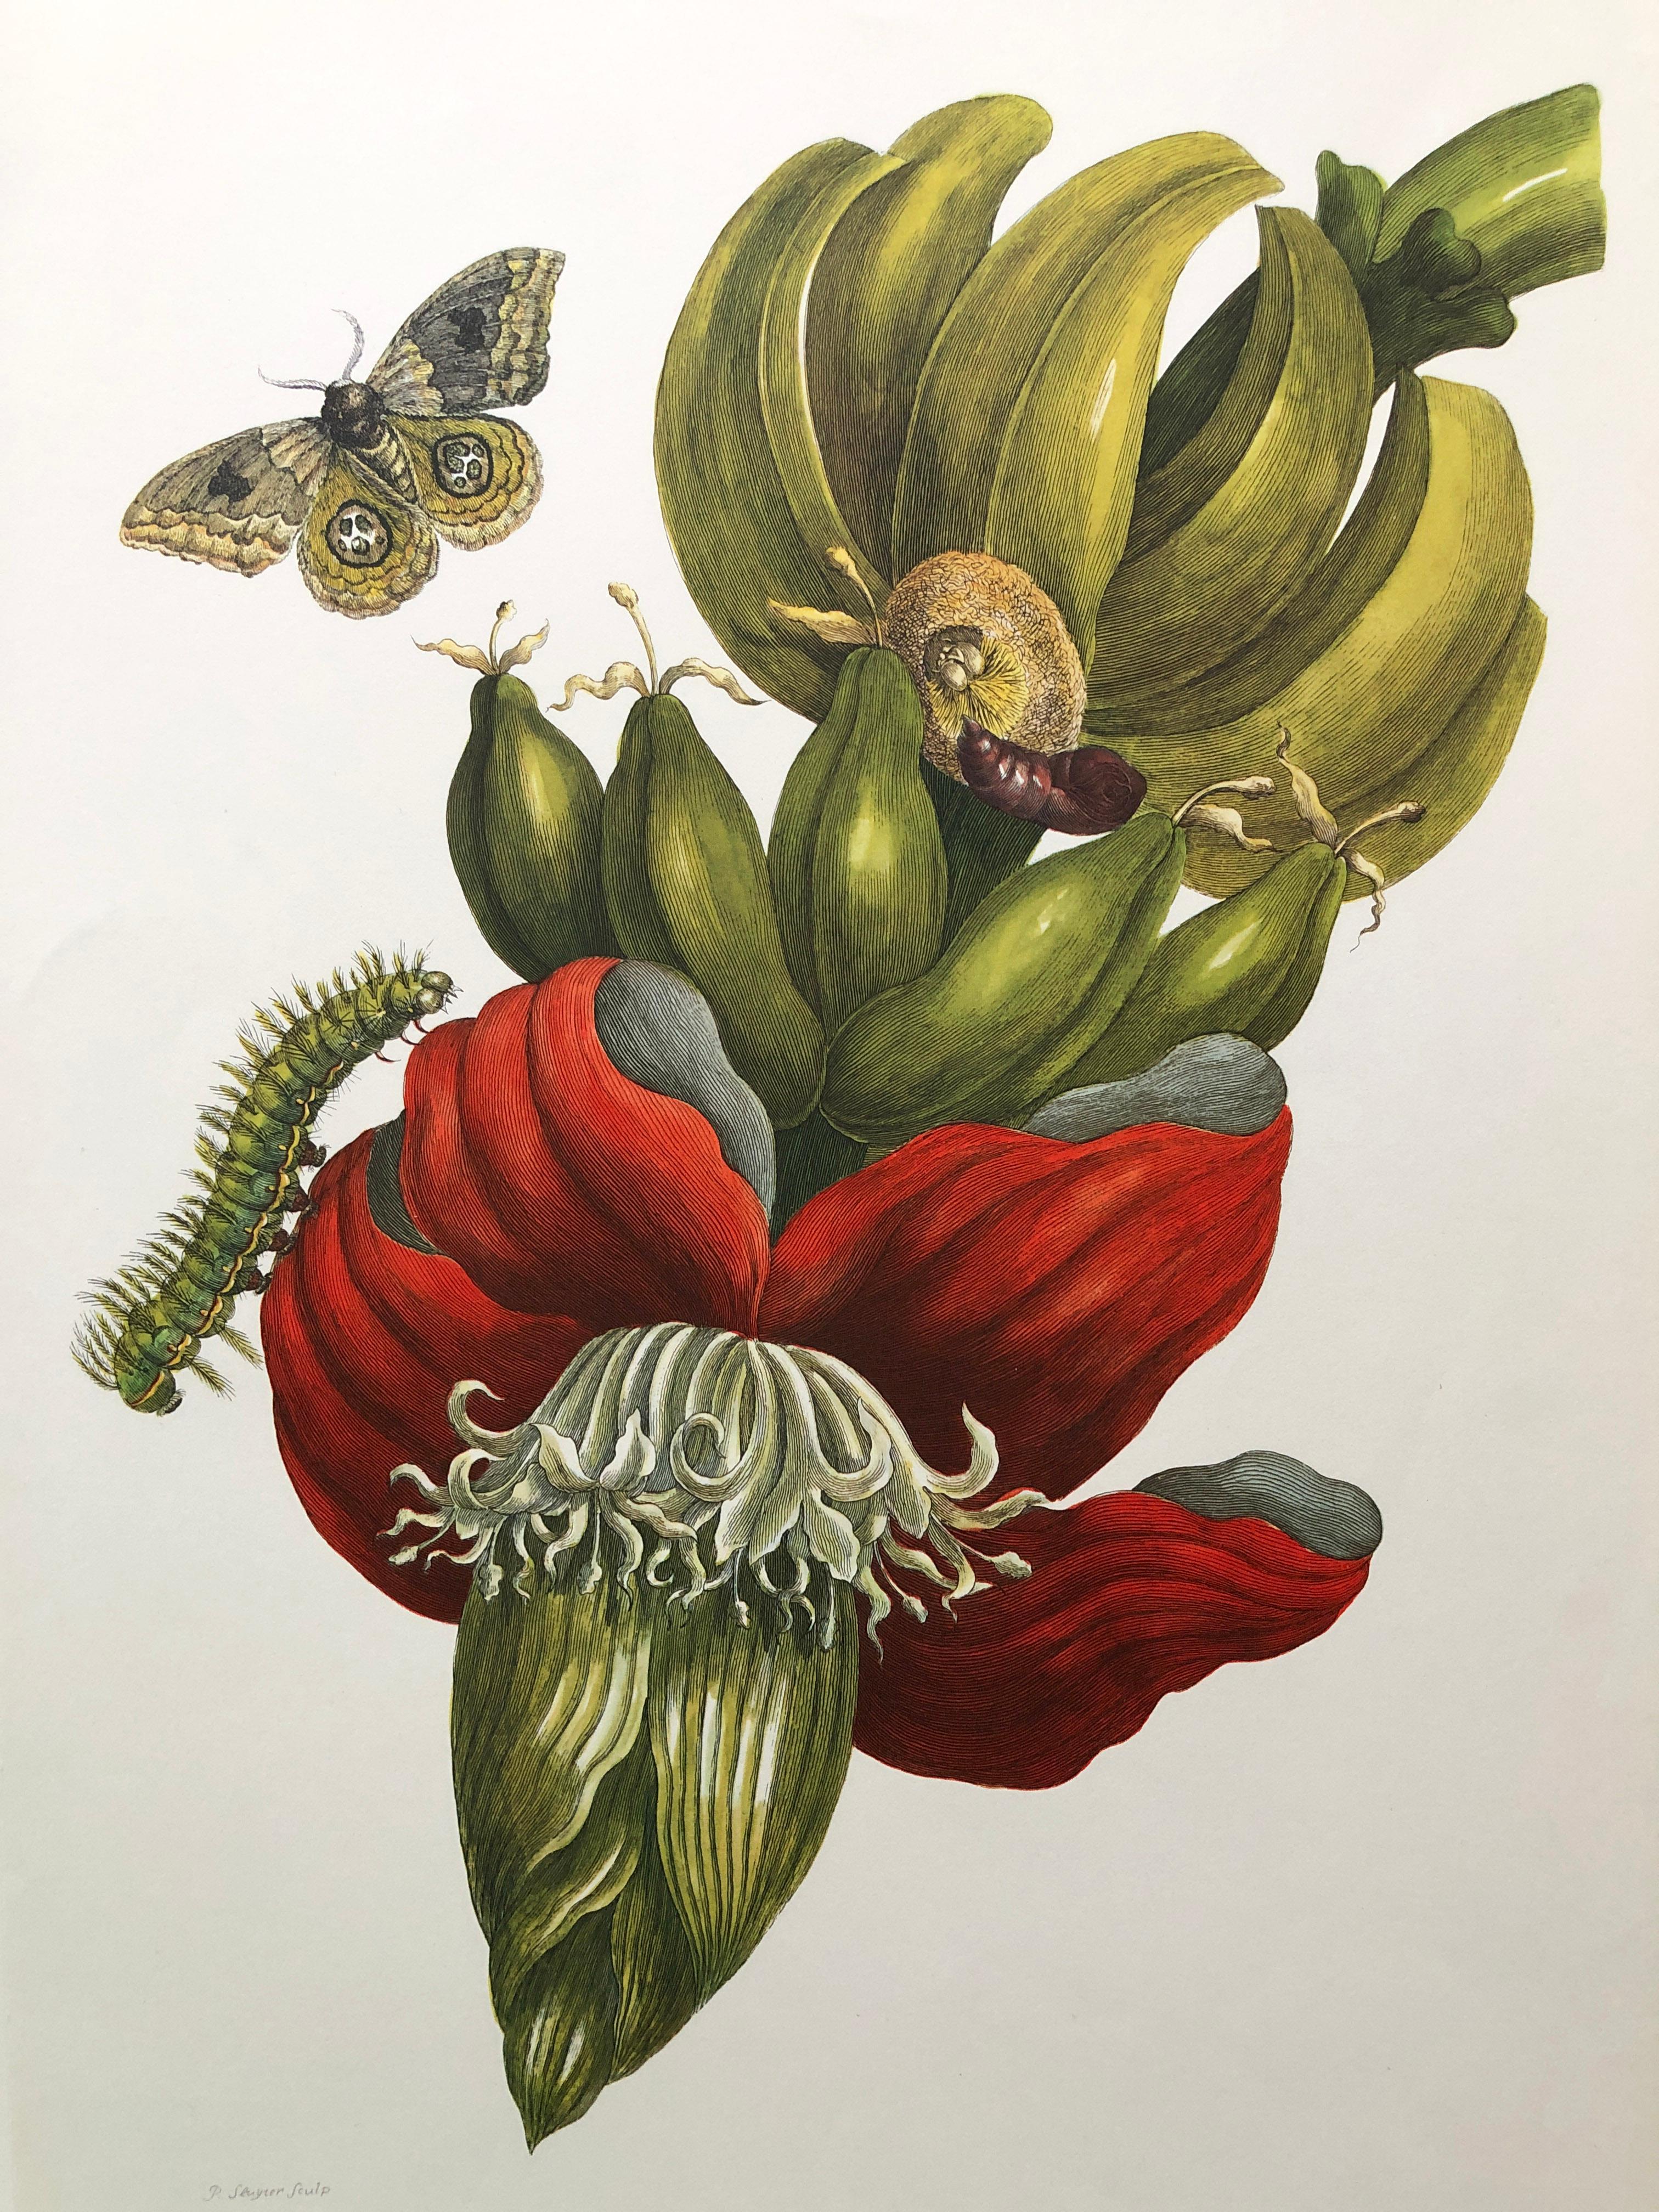 Other Maria Sibylla Merian - P. Sluyter - Flowering Banana and Automeris Nr. 12 For Sale